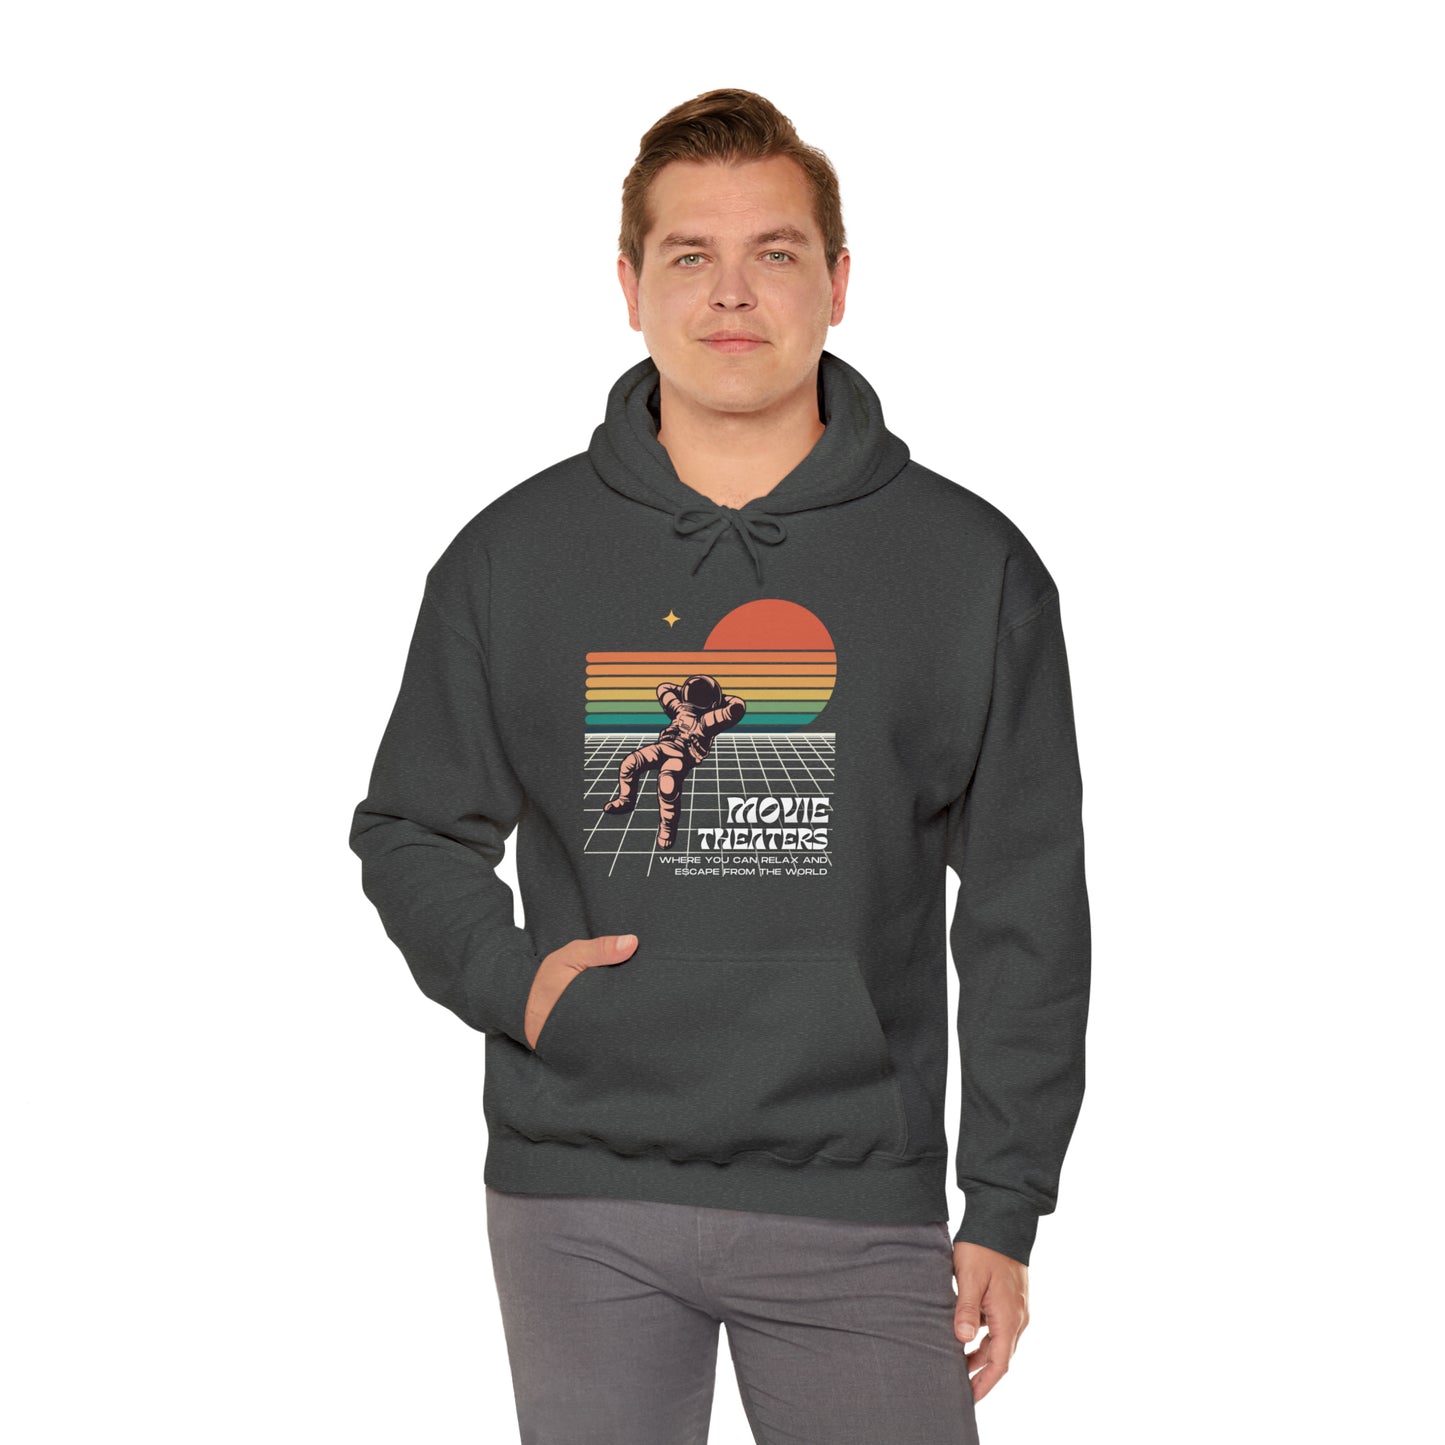 Escape From The World Hoodie